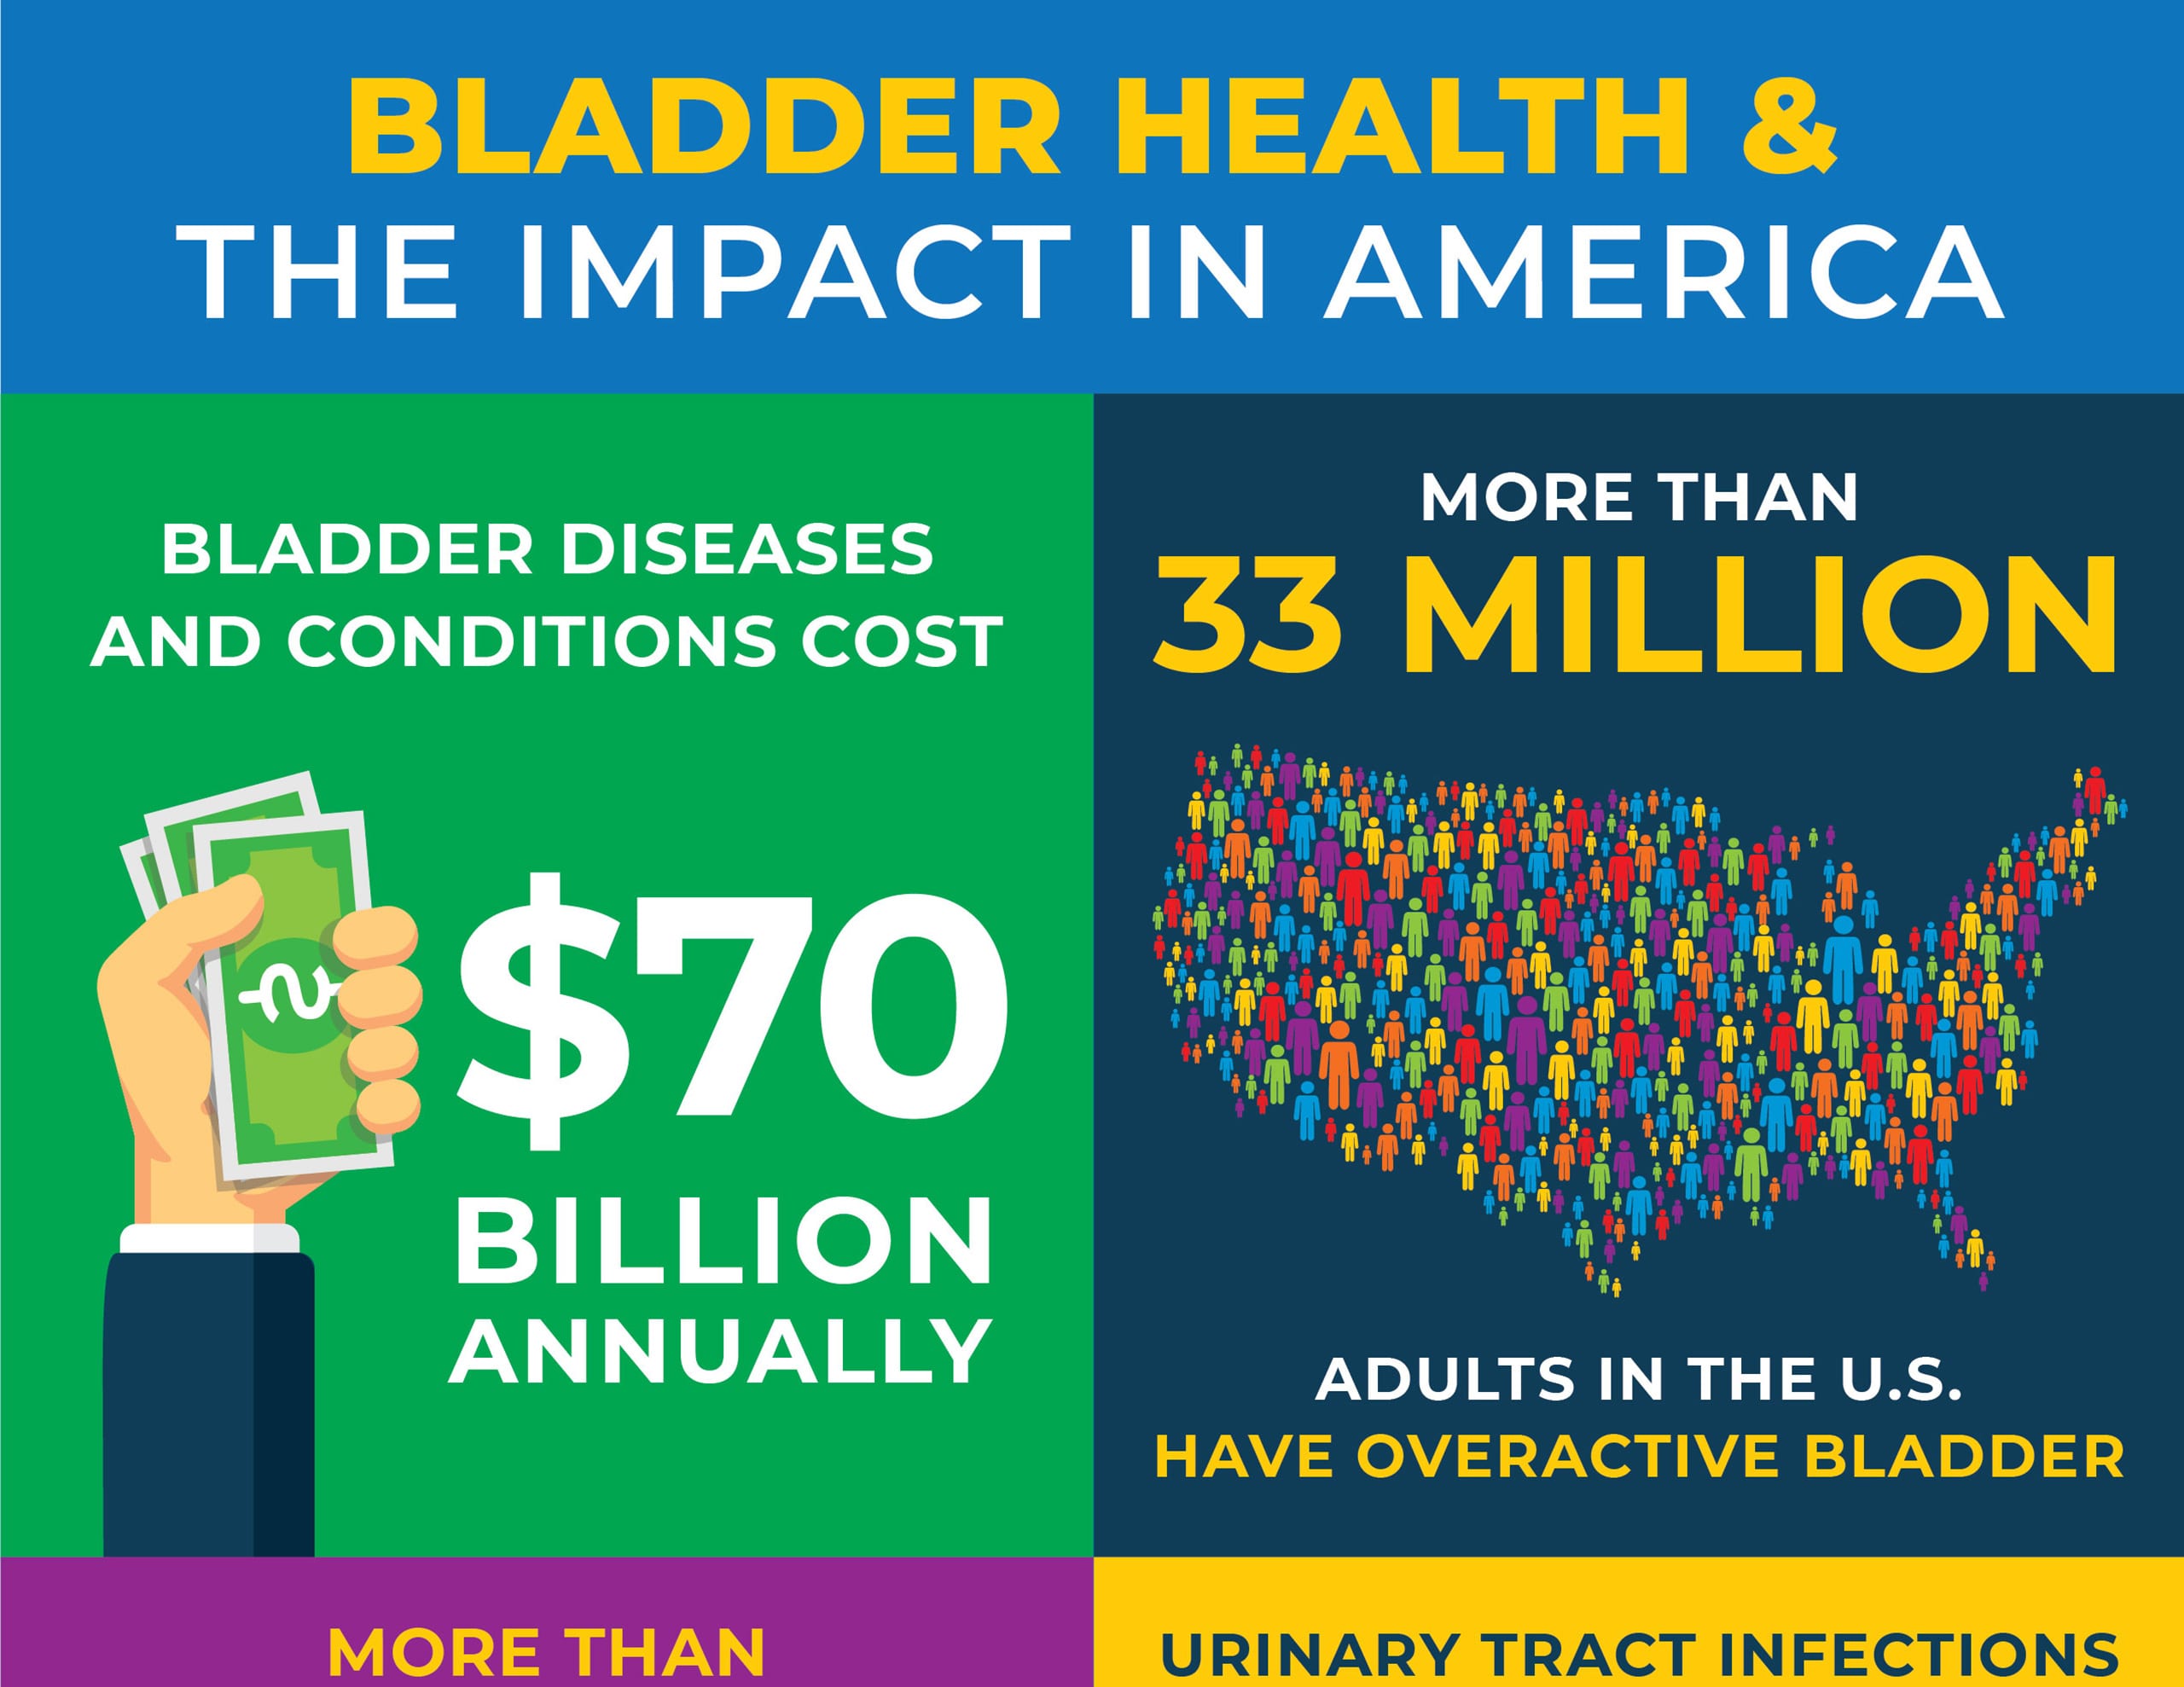 bladder health facts - an infographic showing the affects of bladder health on the United States